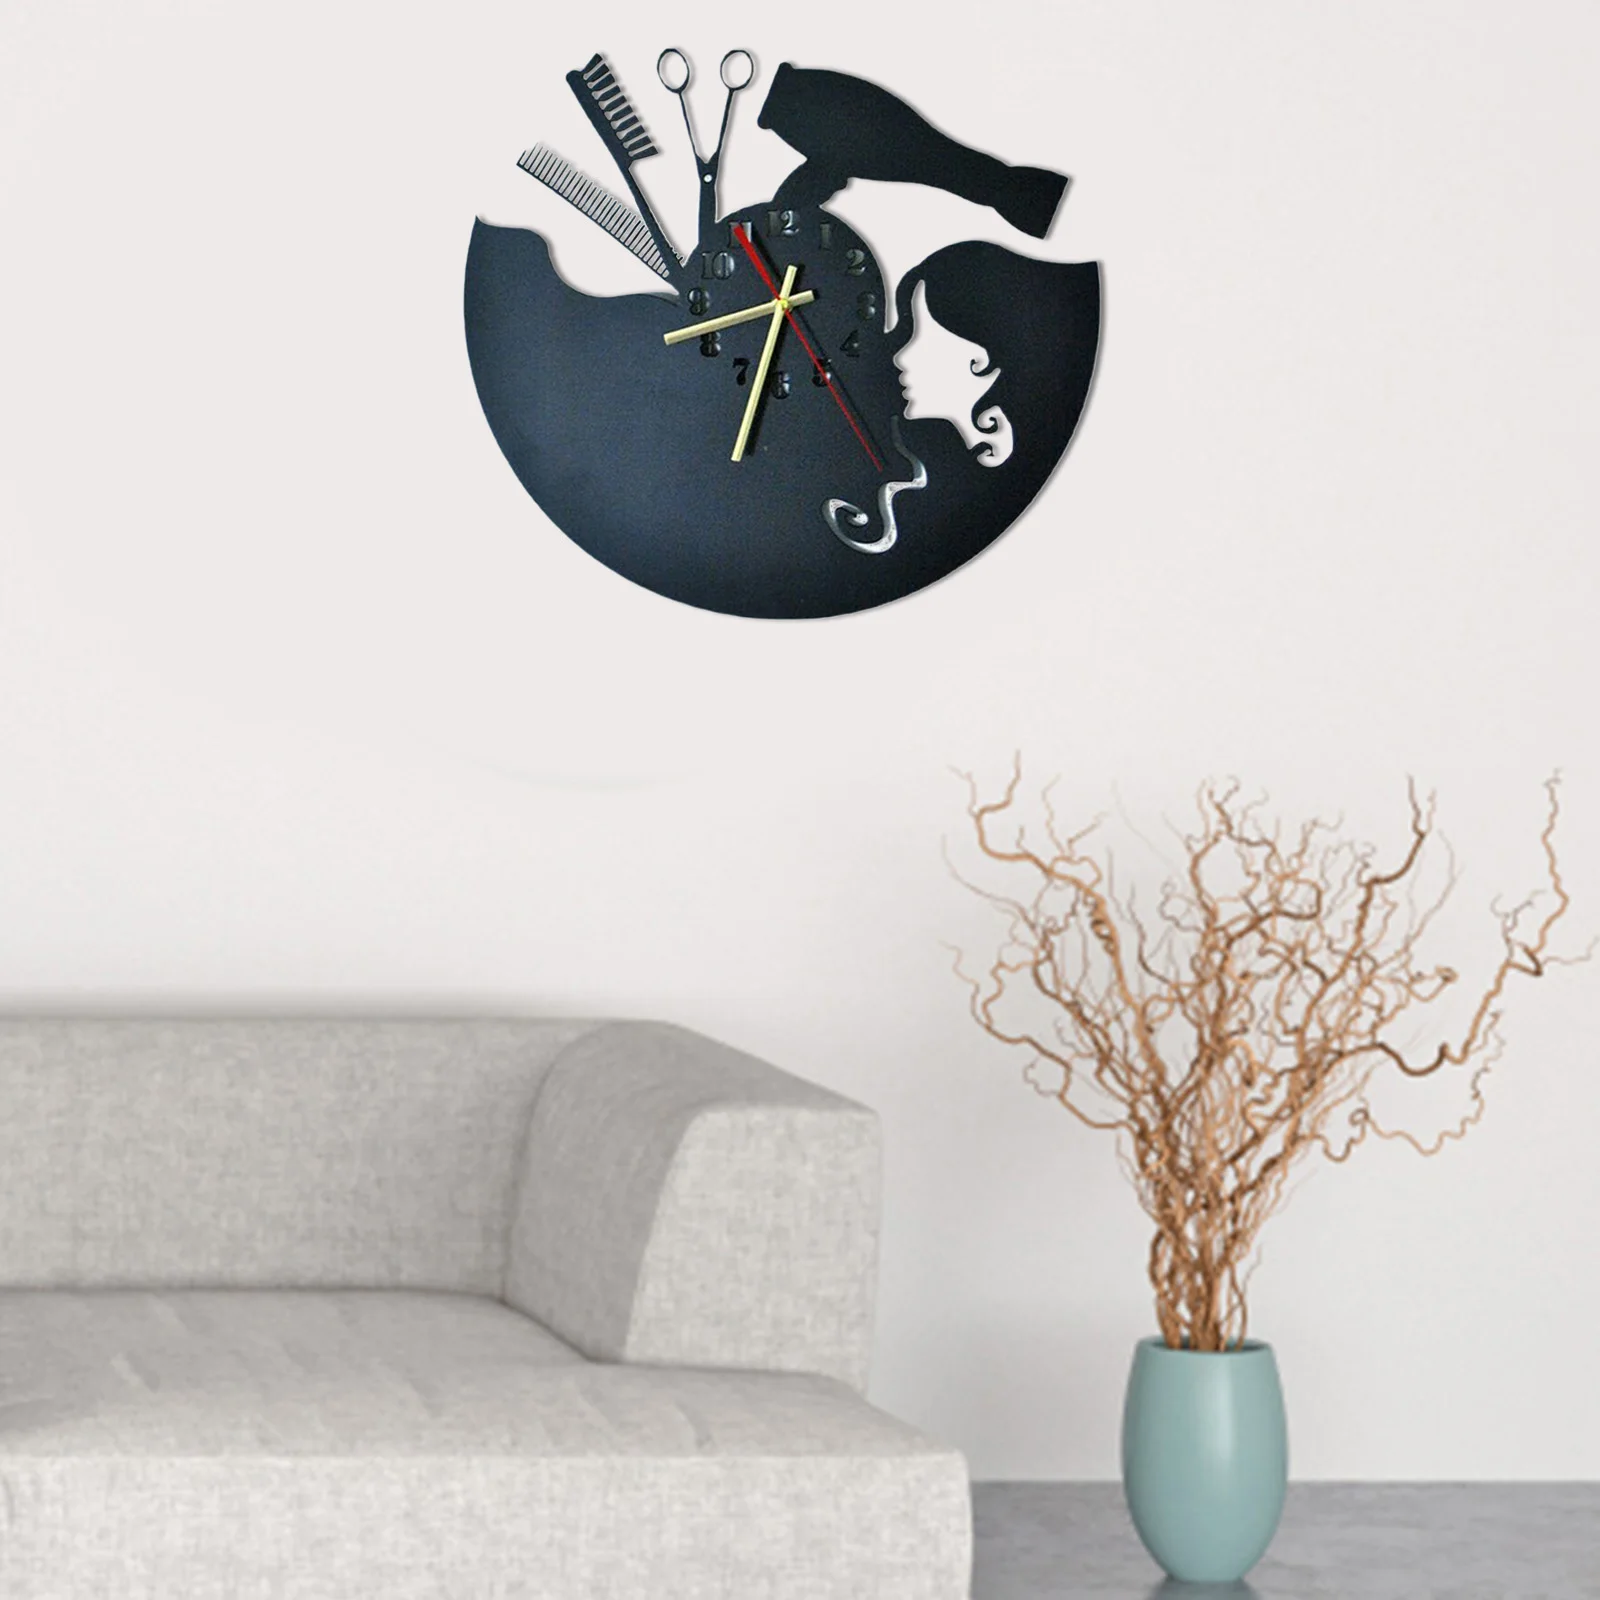 Hairdresser Wall Clock Record Silent Non Ticking for Barbershop Home Office